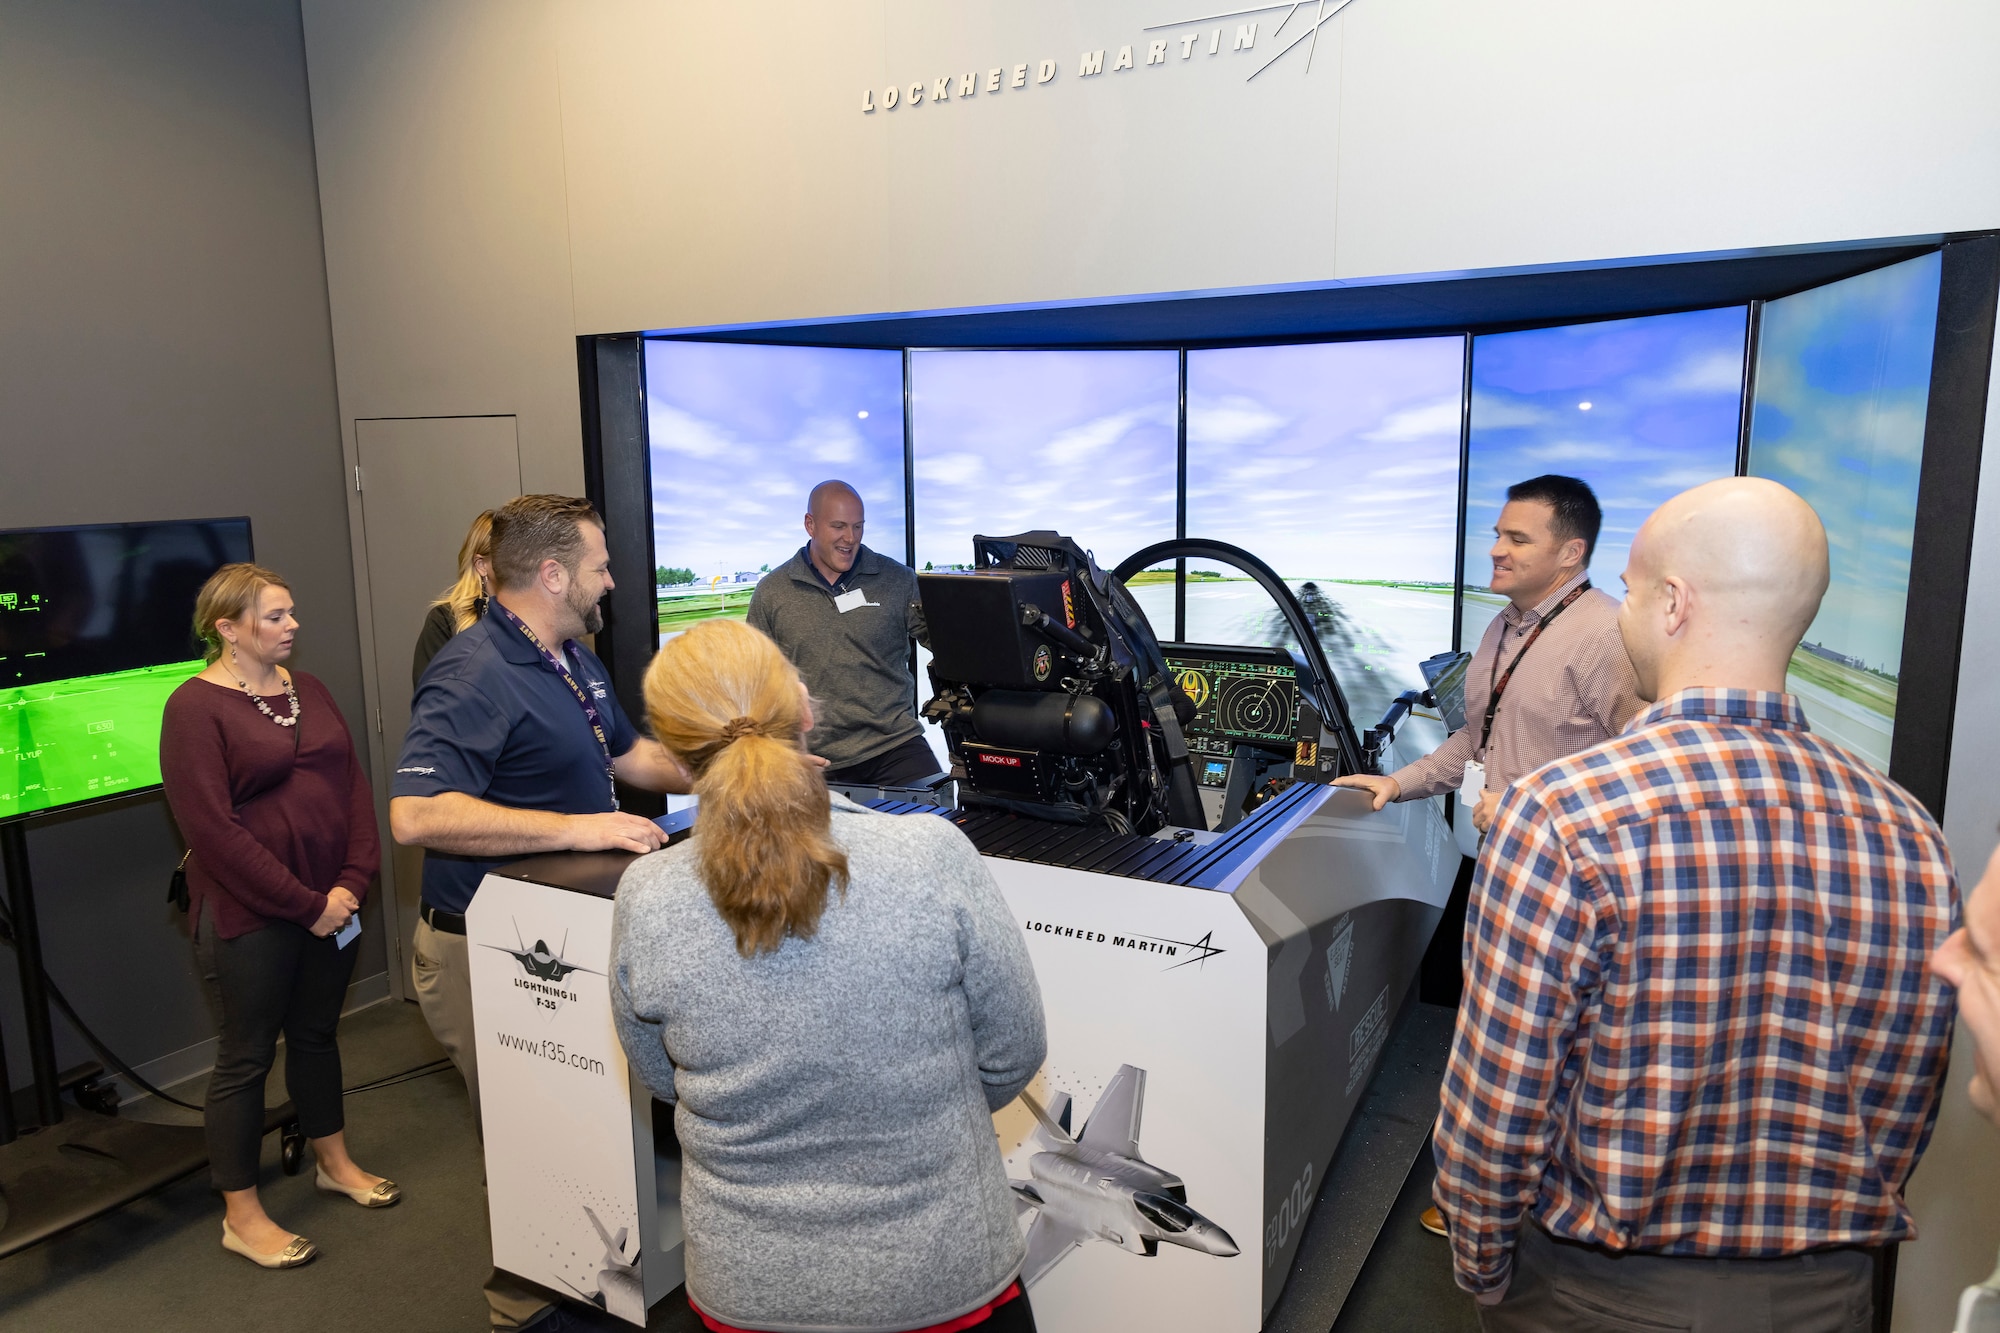 Members learn about the capabilities of an F-35 Aircraft during a visit at Lockheed Martin